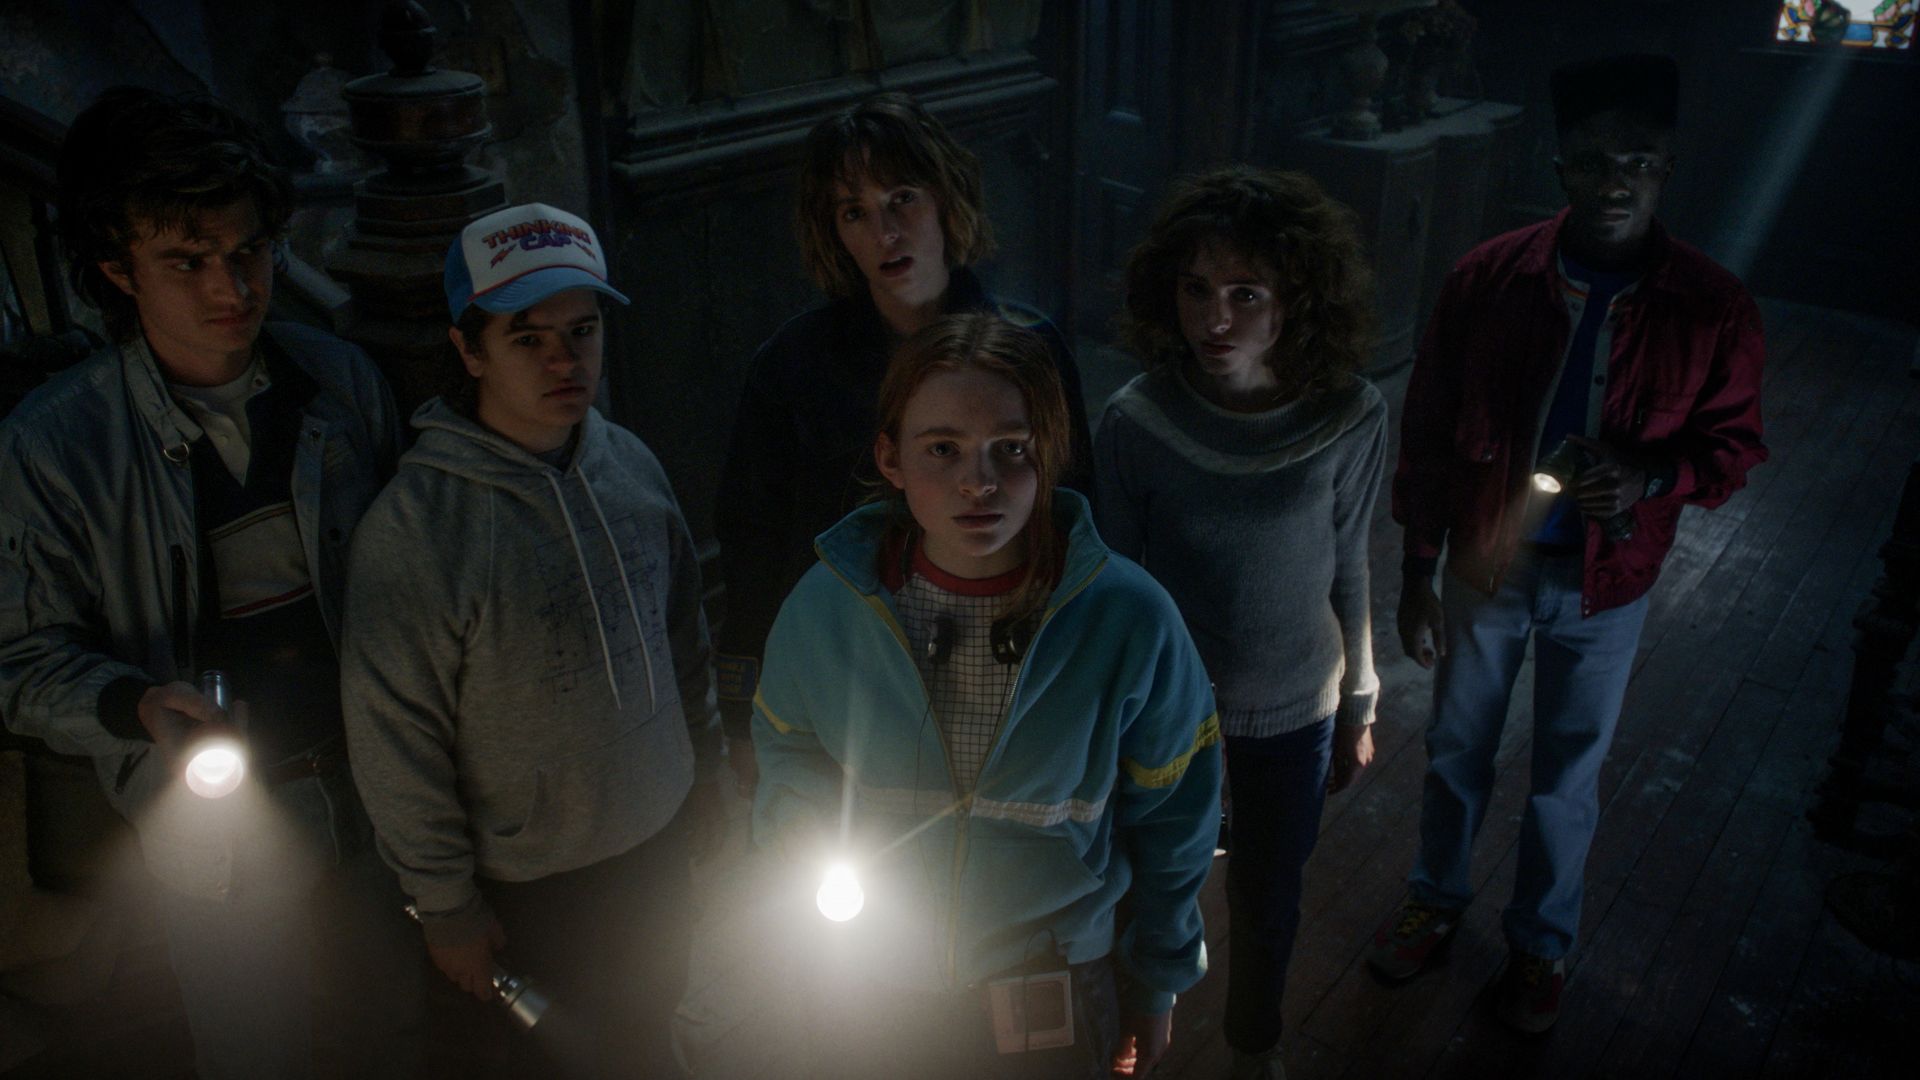 Stranger Things season 4 reviews say the new episodes are ambitious – but long